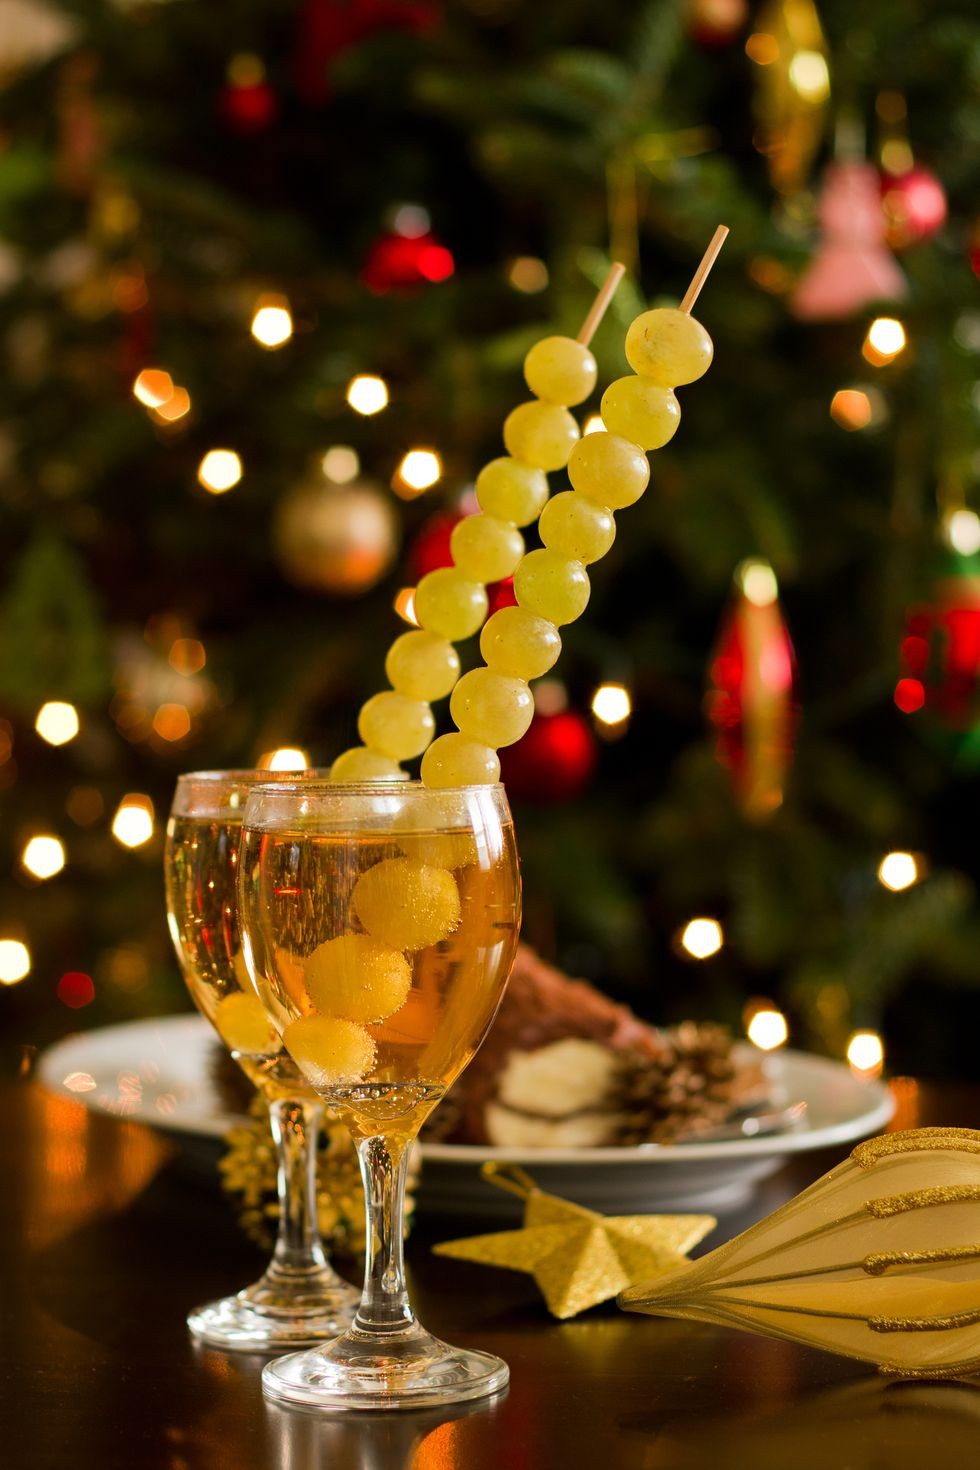 twelve-grapes-new-years-eve-superstition-1571689300-1704030060.jpg